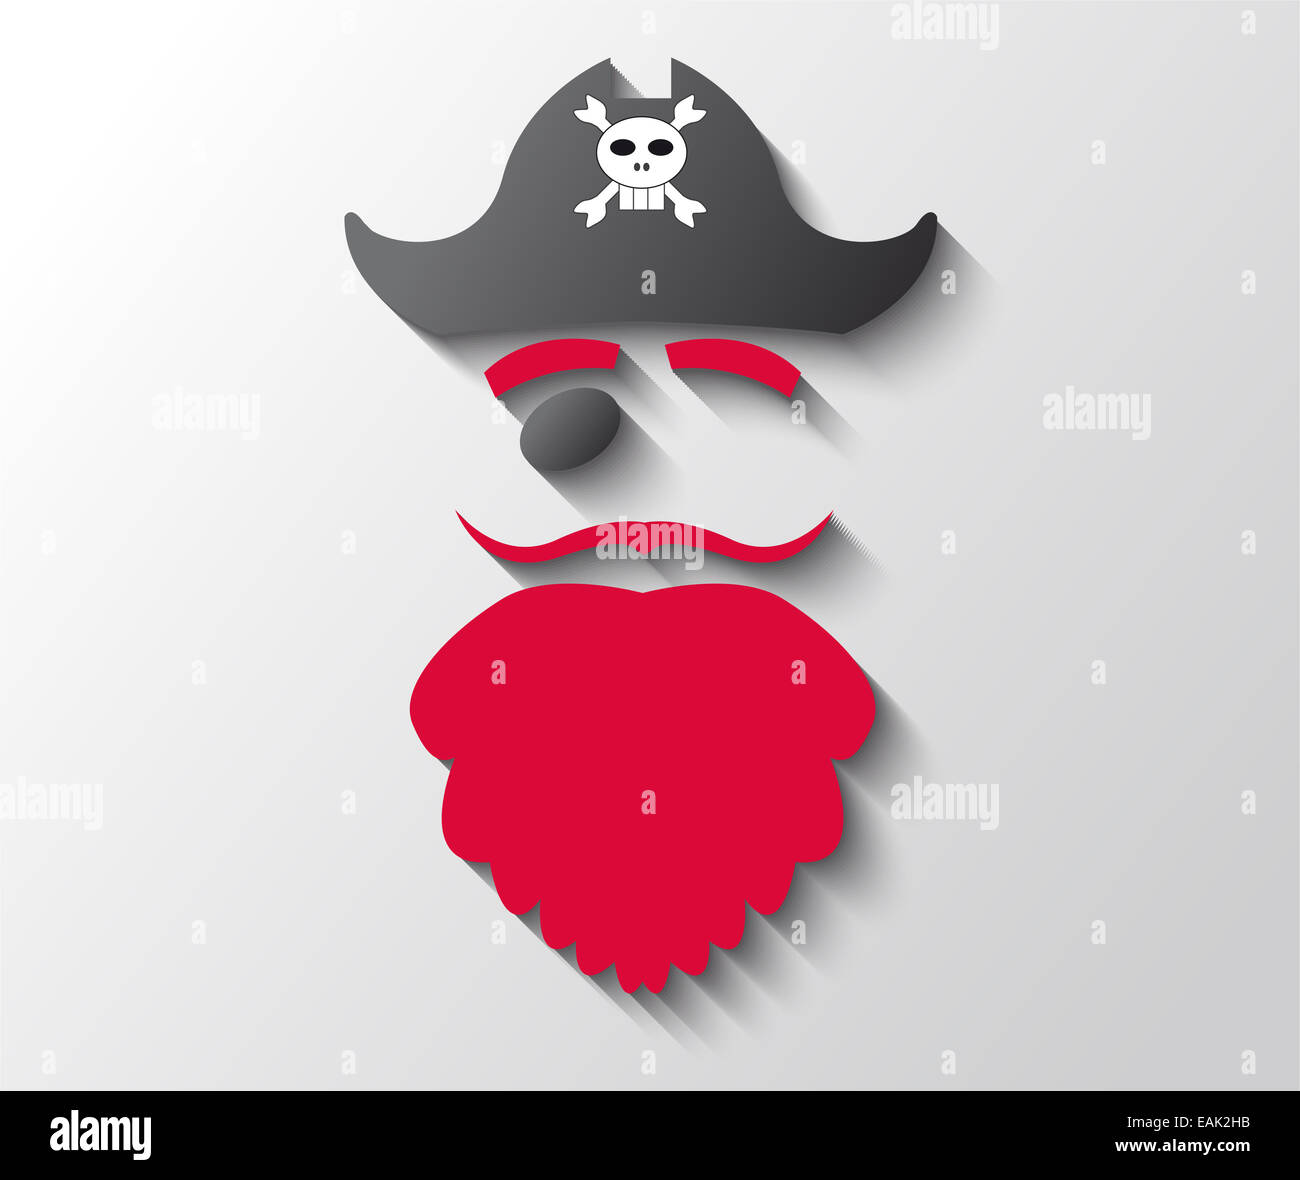 Illustration of pirate with red beard and black hat Stock Photo